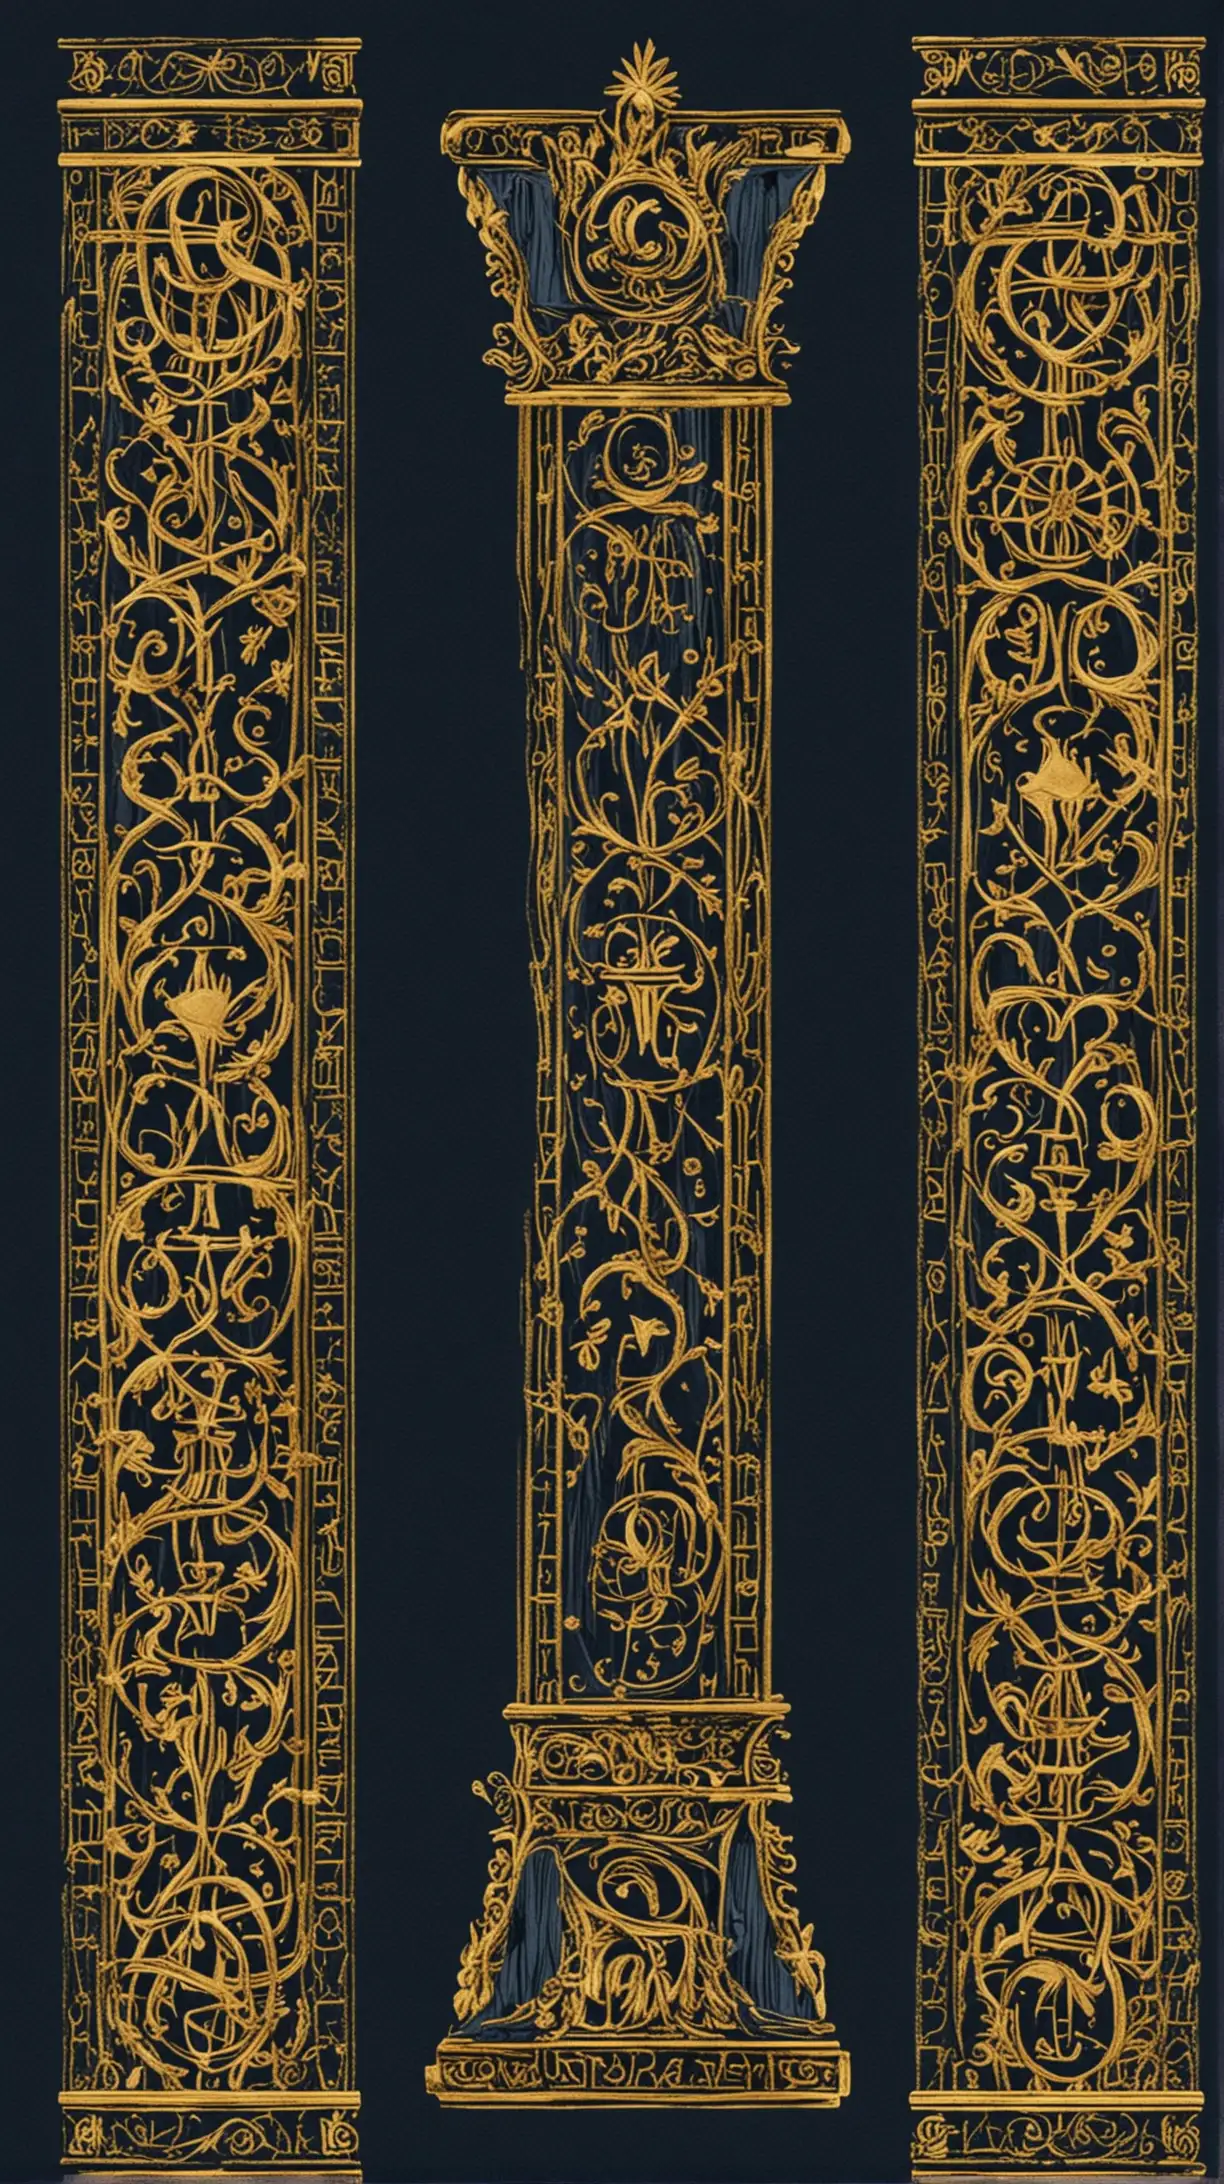 The border design for tarot cards: one Greek pillar on the right, one Greek pillar on the left, and a blank space in the middle, where the symbol of the tarot card will emerge. Dark blue, golden, intricate, beautiful.